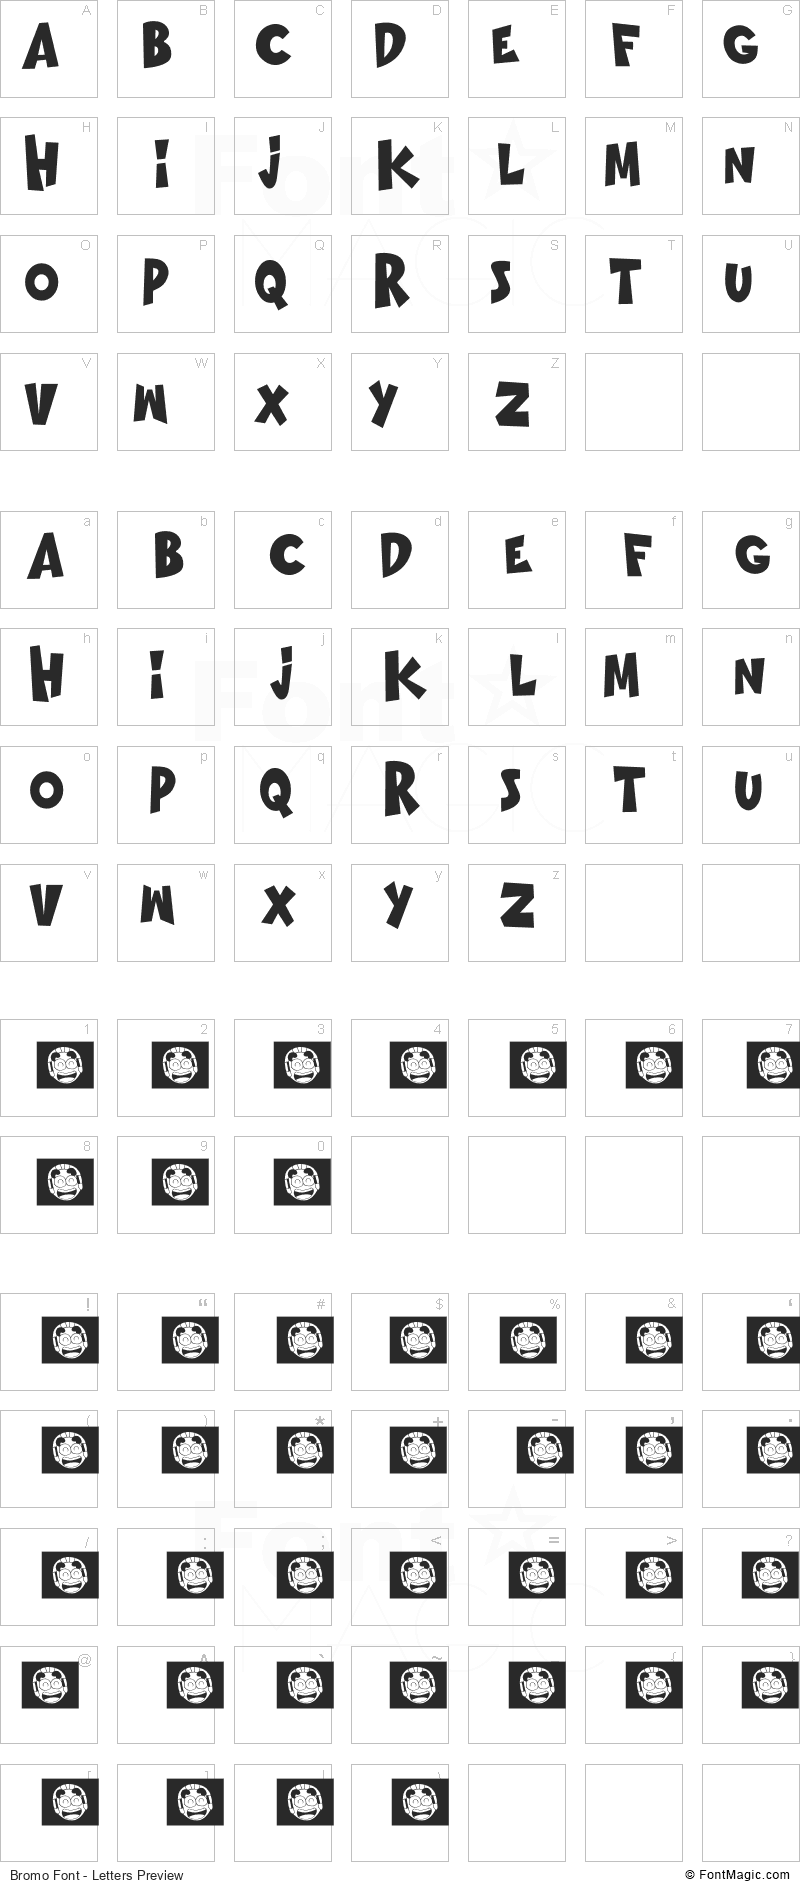 Bromo Font - All Latters Preview Chart